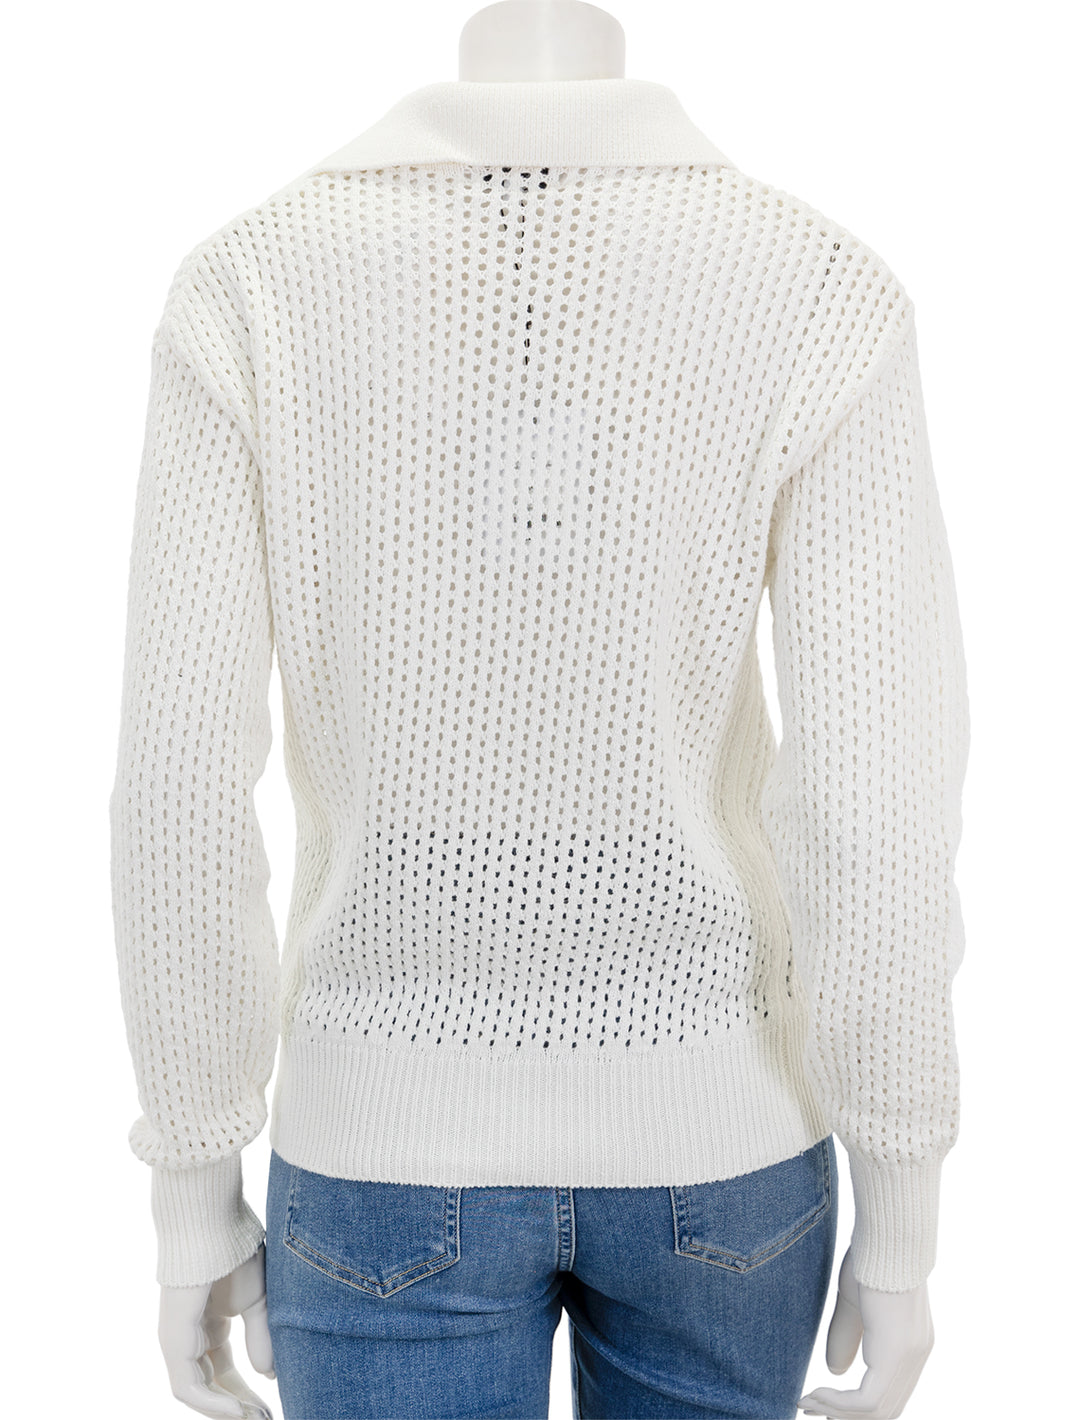 Back view of Suncoo Paris' Pabloni Polo Sweater in Blanc.